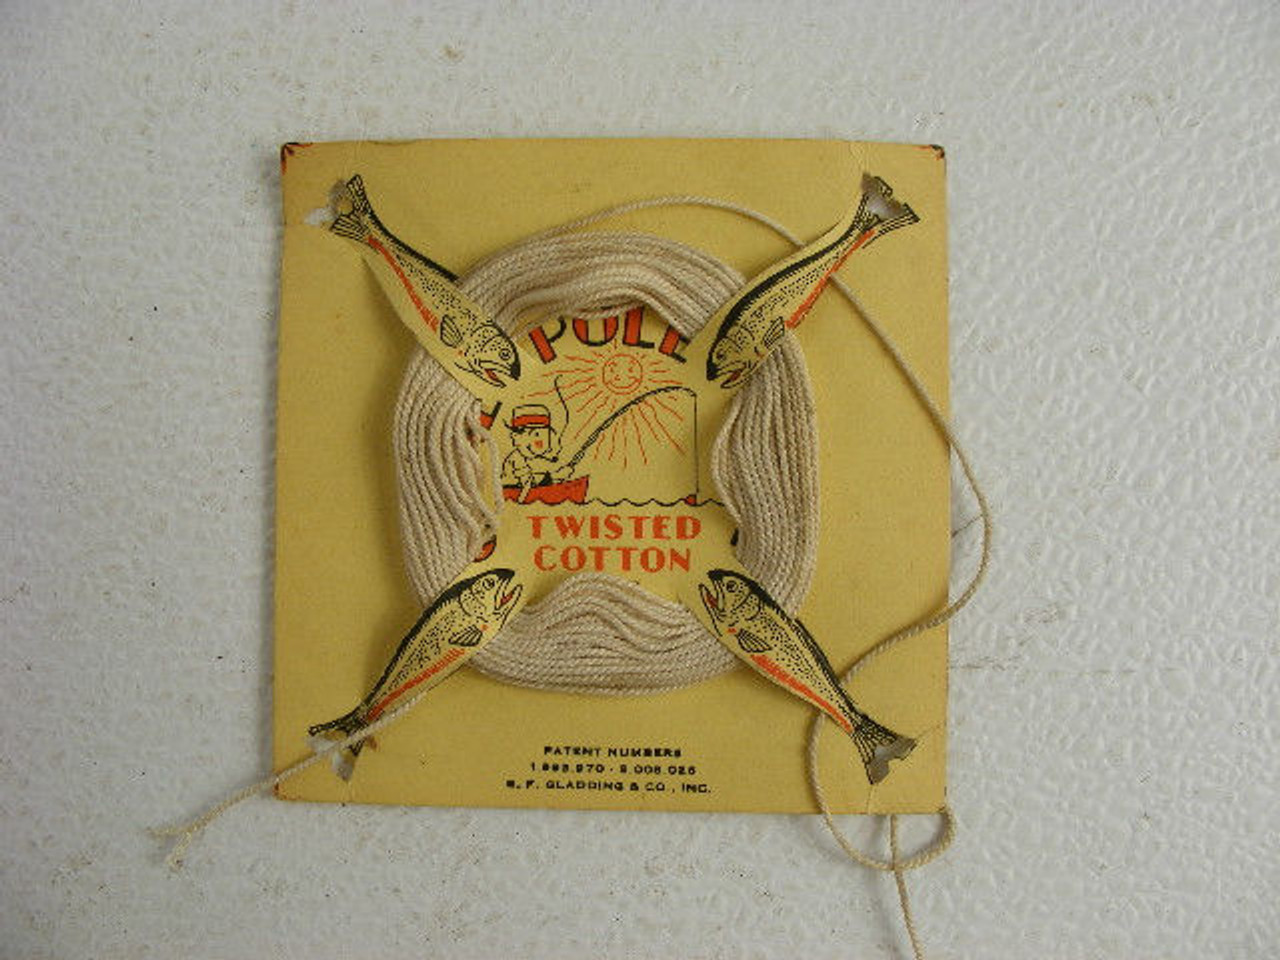 A neat vintage cane pole fishing line card designed with fish for holders  and made by B.F. Gladding. - Antique Mystique